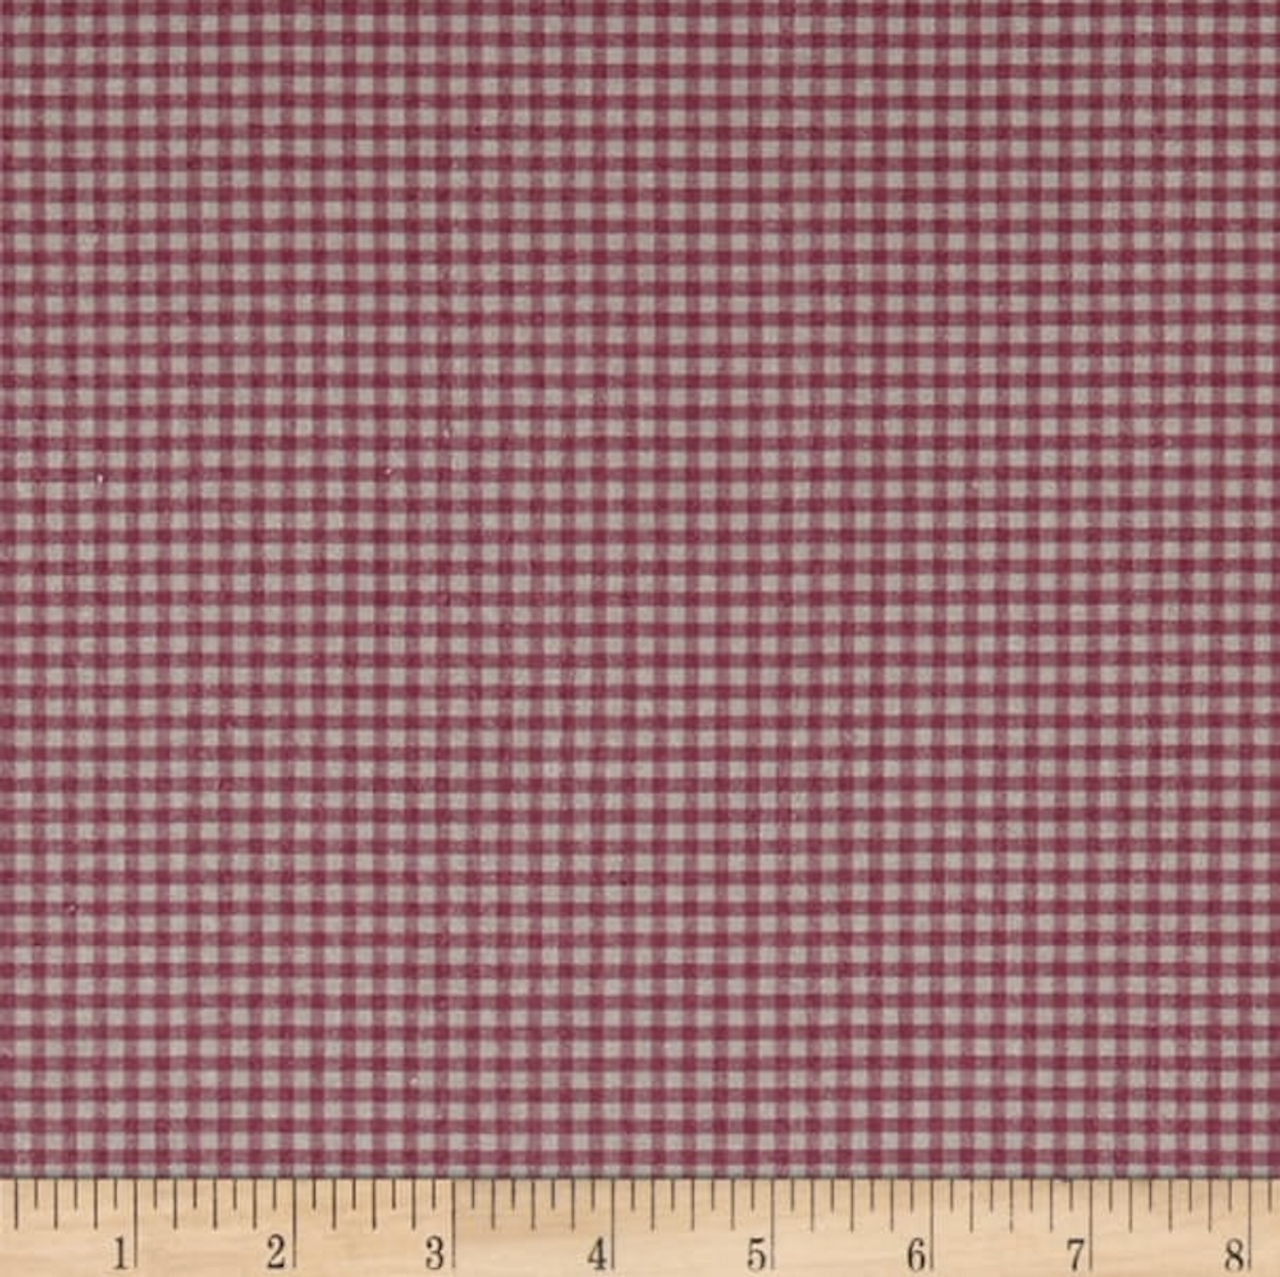 Stof of France Printemps Check Pink Cotton Quilting Fabric By The Yard